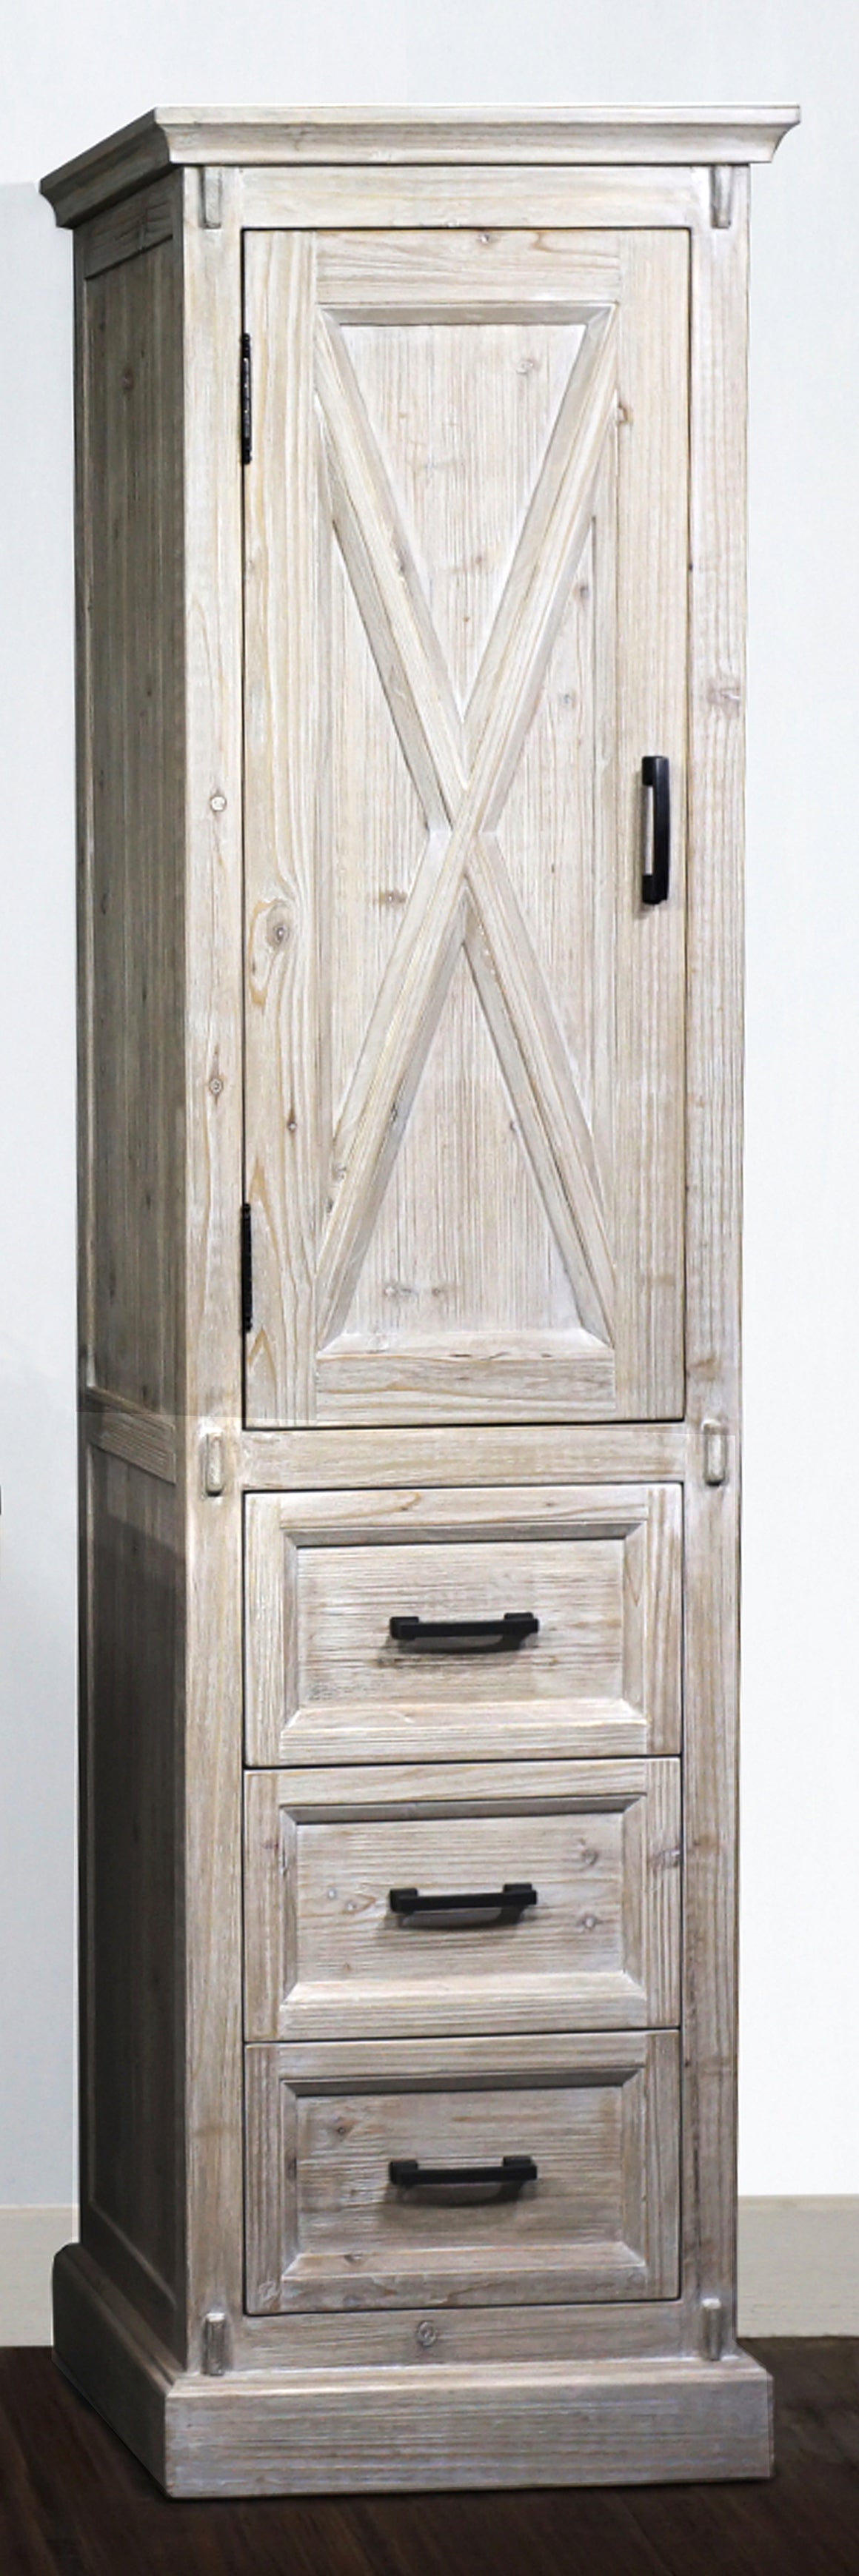 79"HIGH RUSTIC SOLID FUR BARN DOOR STYLE SIDE CABINET IN WHITE WASH